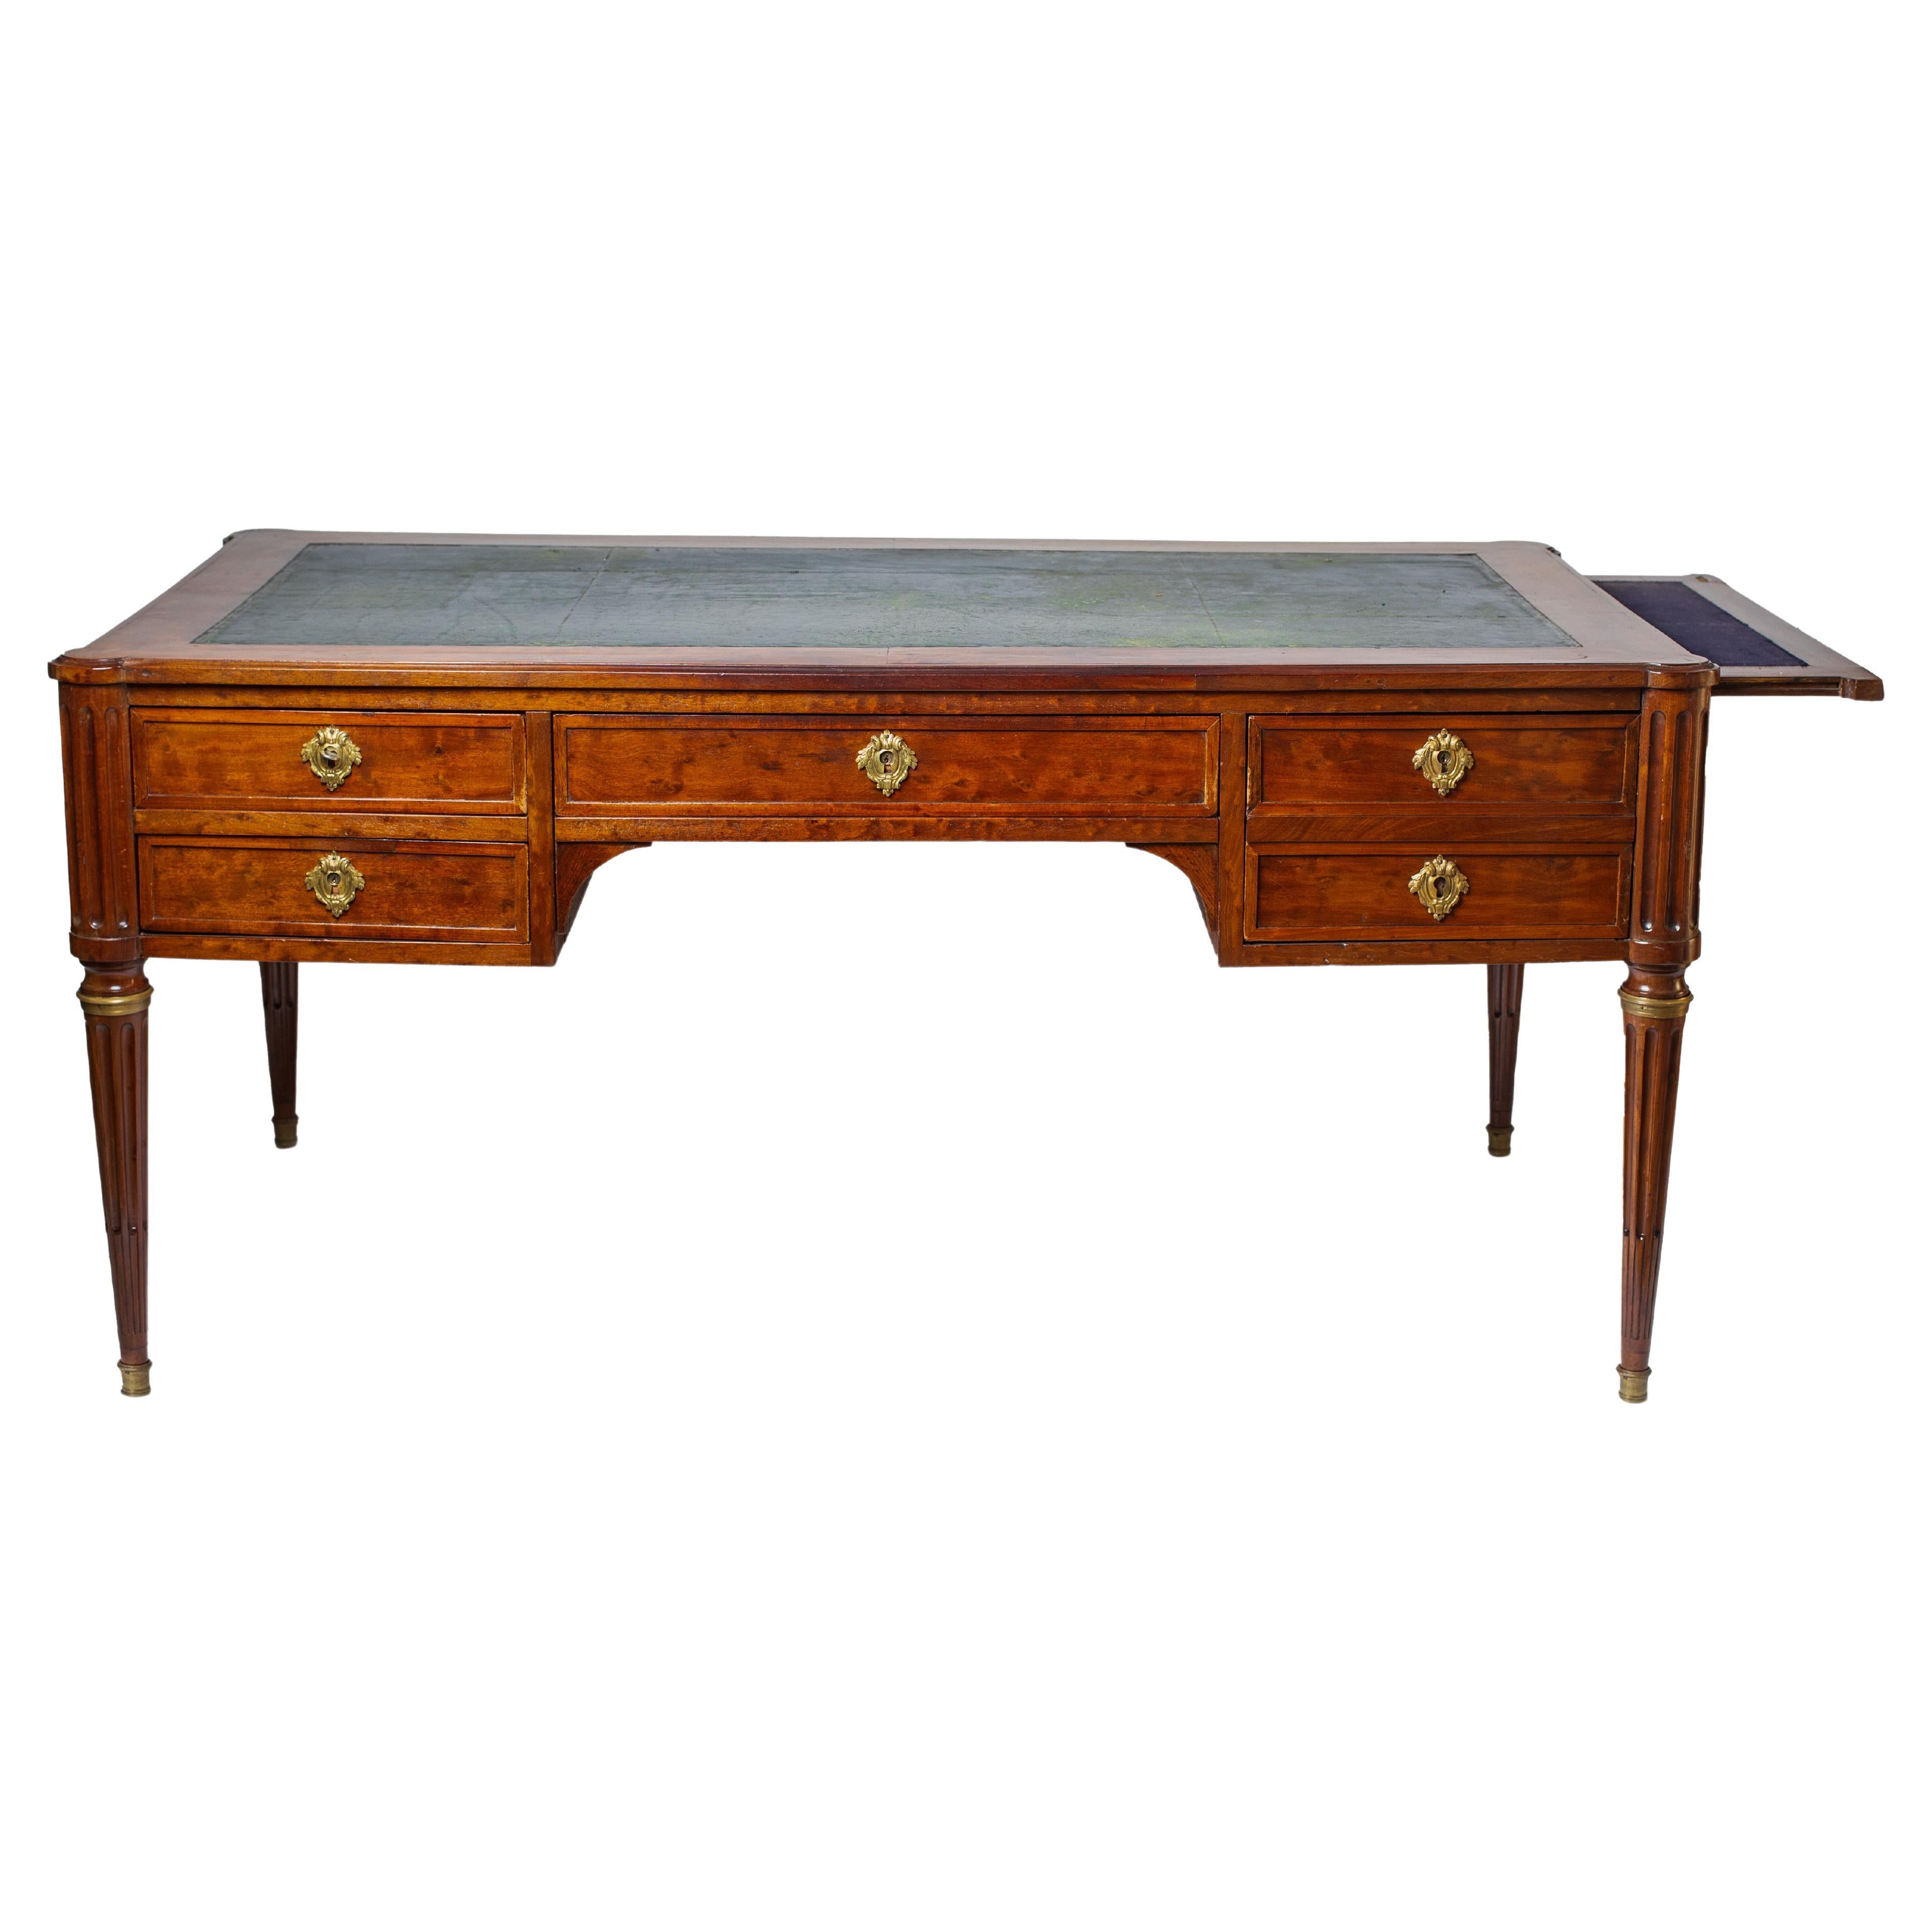 18th Century Bureau Plat Mahogany France 1780 Writing Desk with Side Drawers For Sale